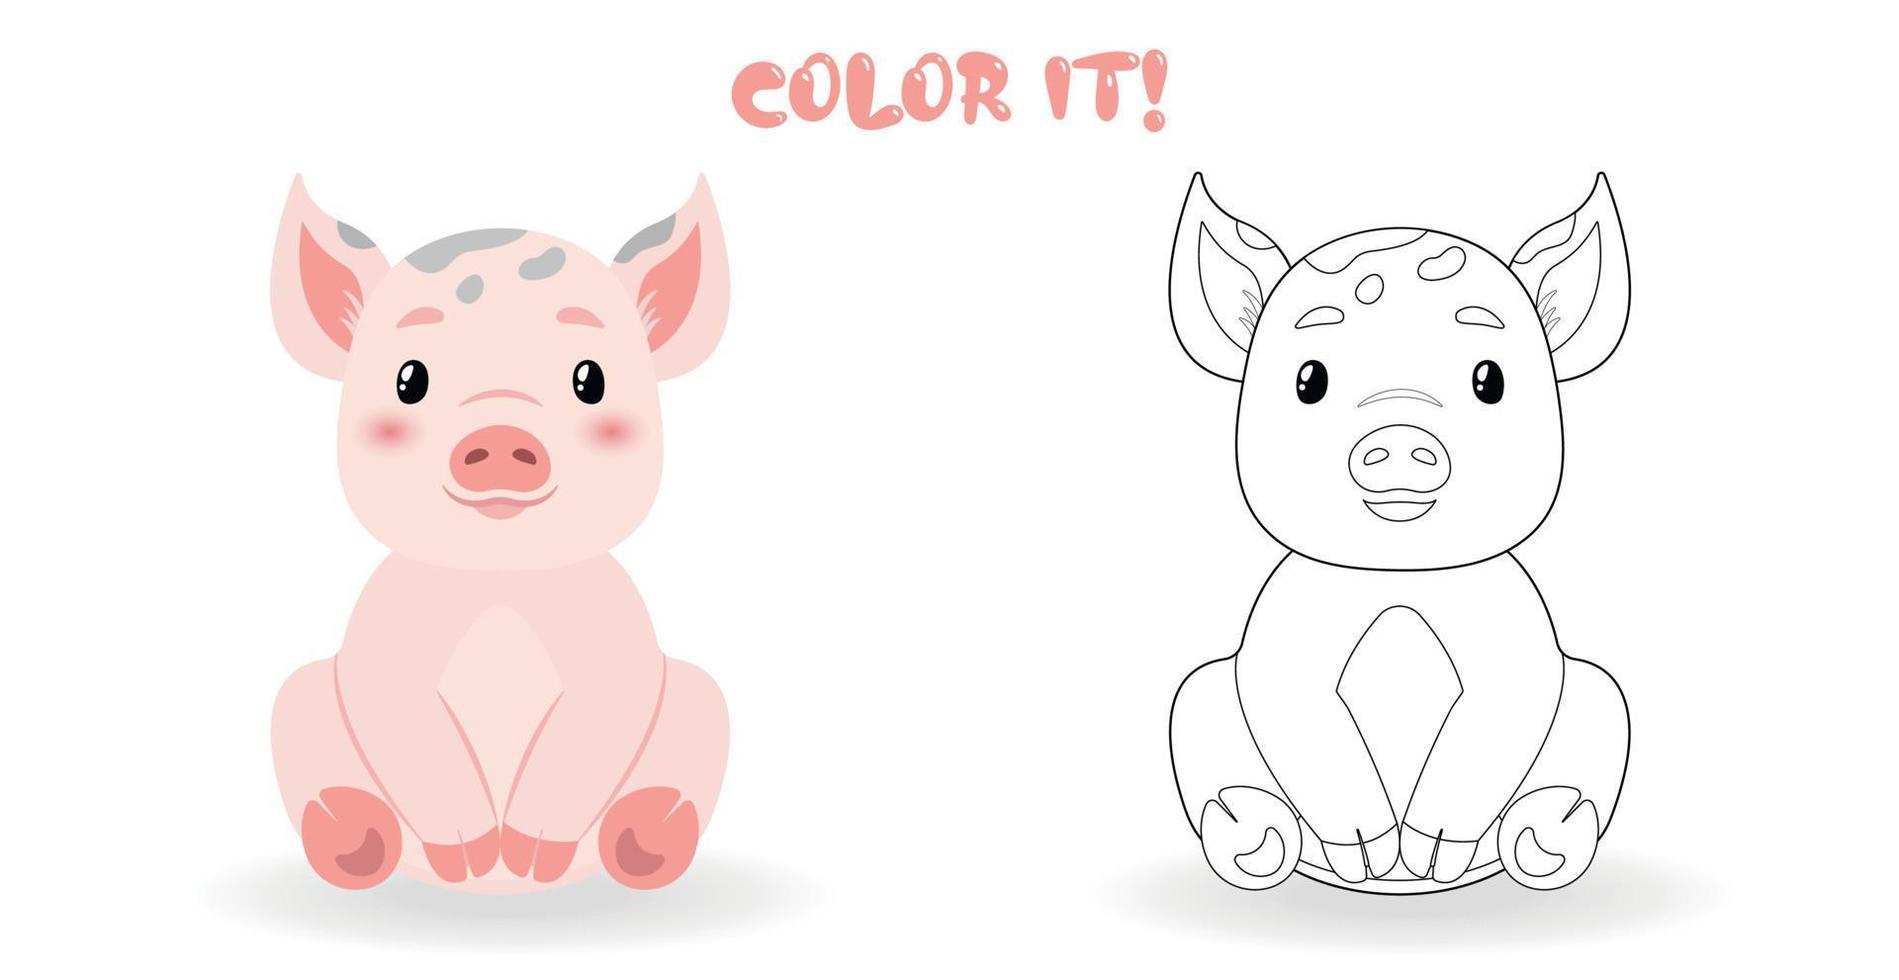 Coloring page for children. Color it. Little cute pig vector illustration